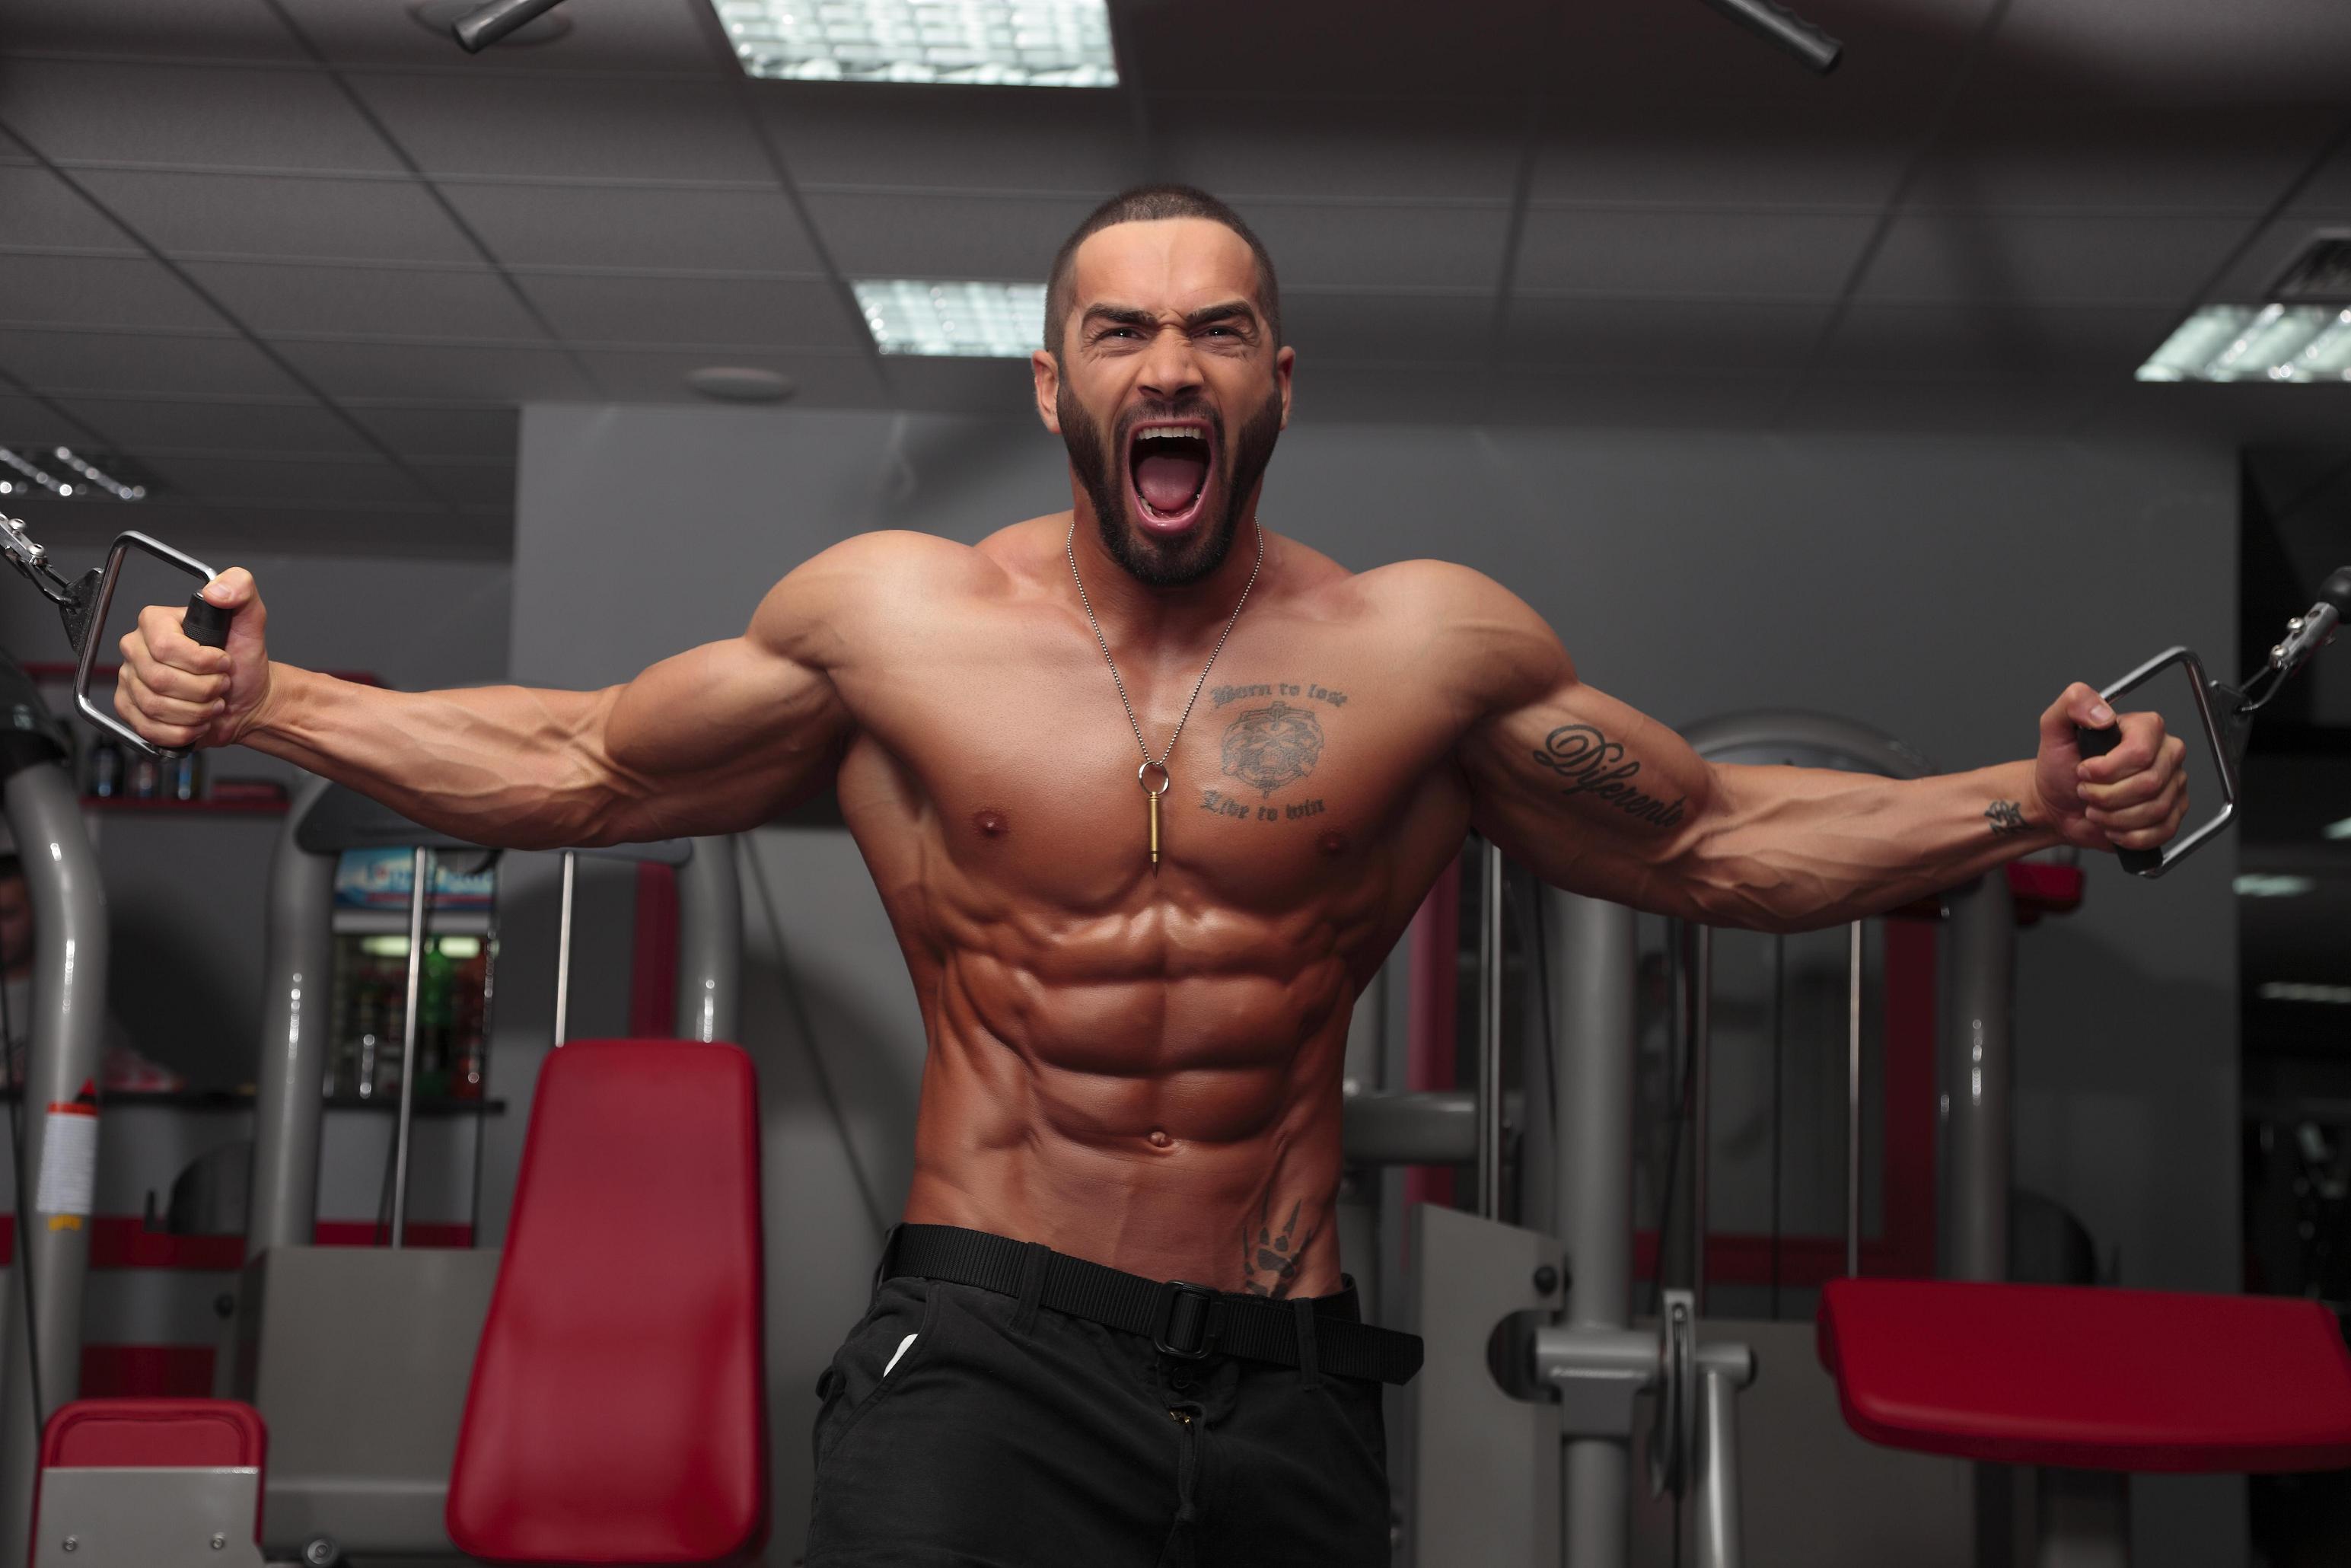 Lazar Angelov Net Worth - Reflection Of His Success In The Fitness Industry